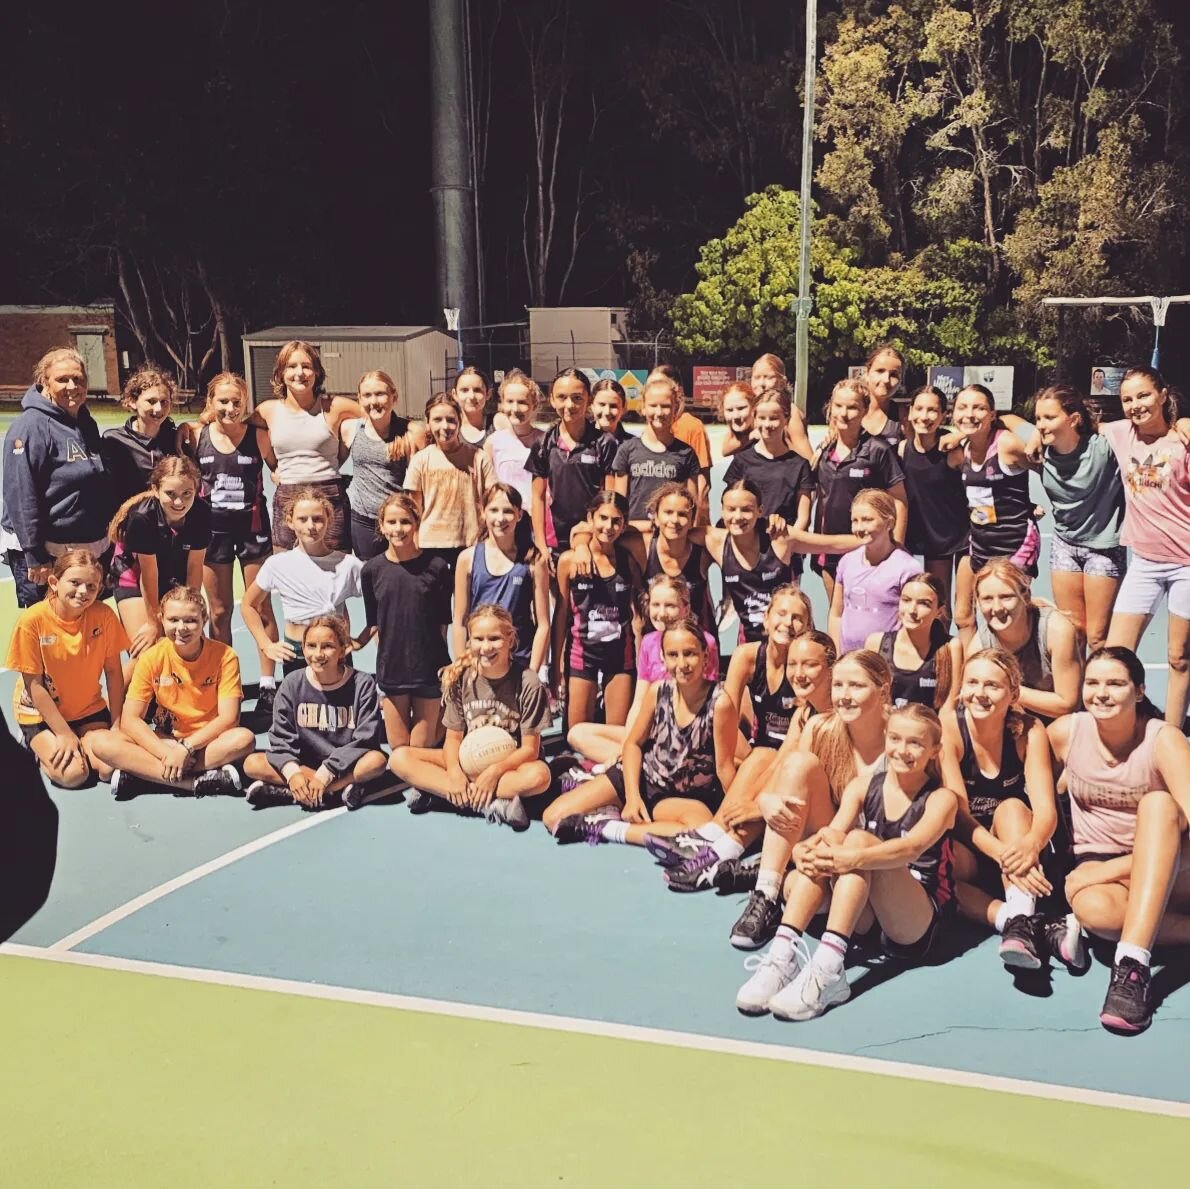 Amazing turn out this evening with over 40 members attending the Patti Farrell clinic.  Many thanks for a funfilled evening.

#pattifarrellclinic #netball #coolum